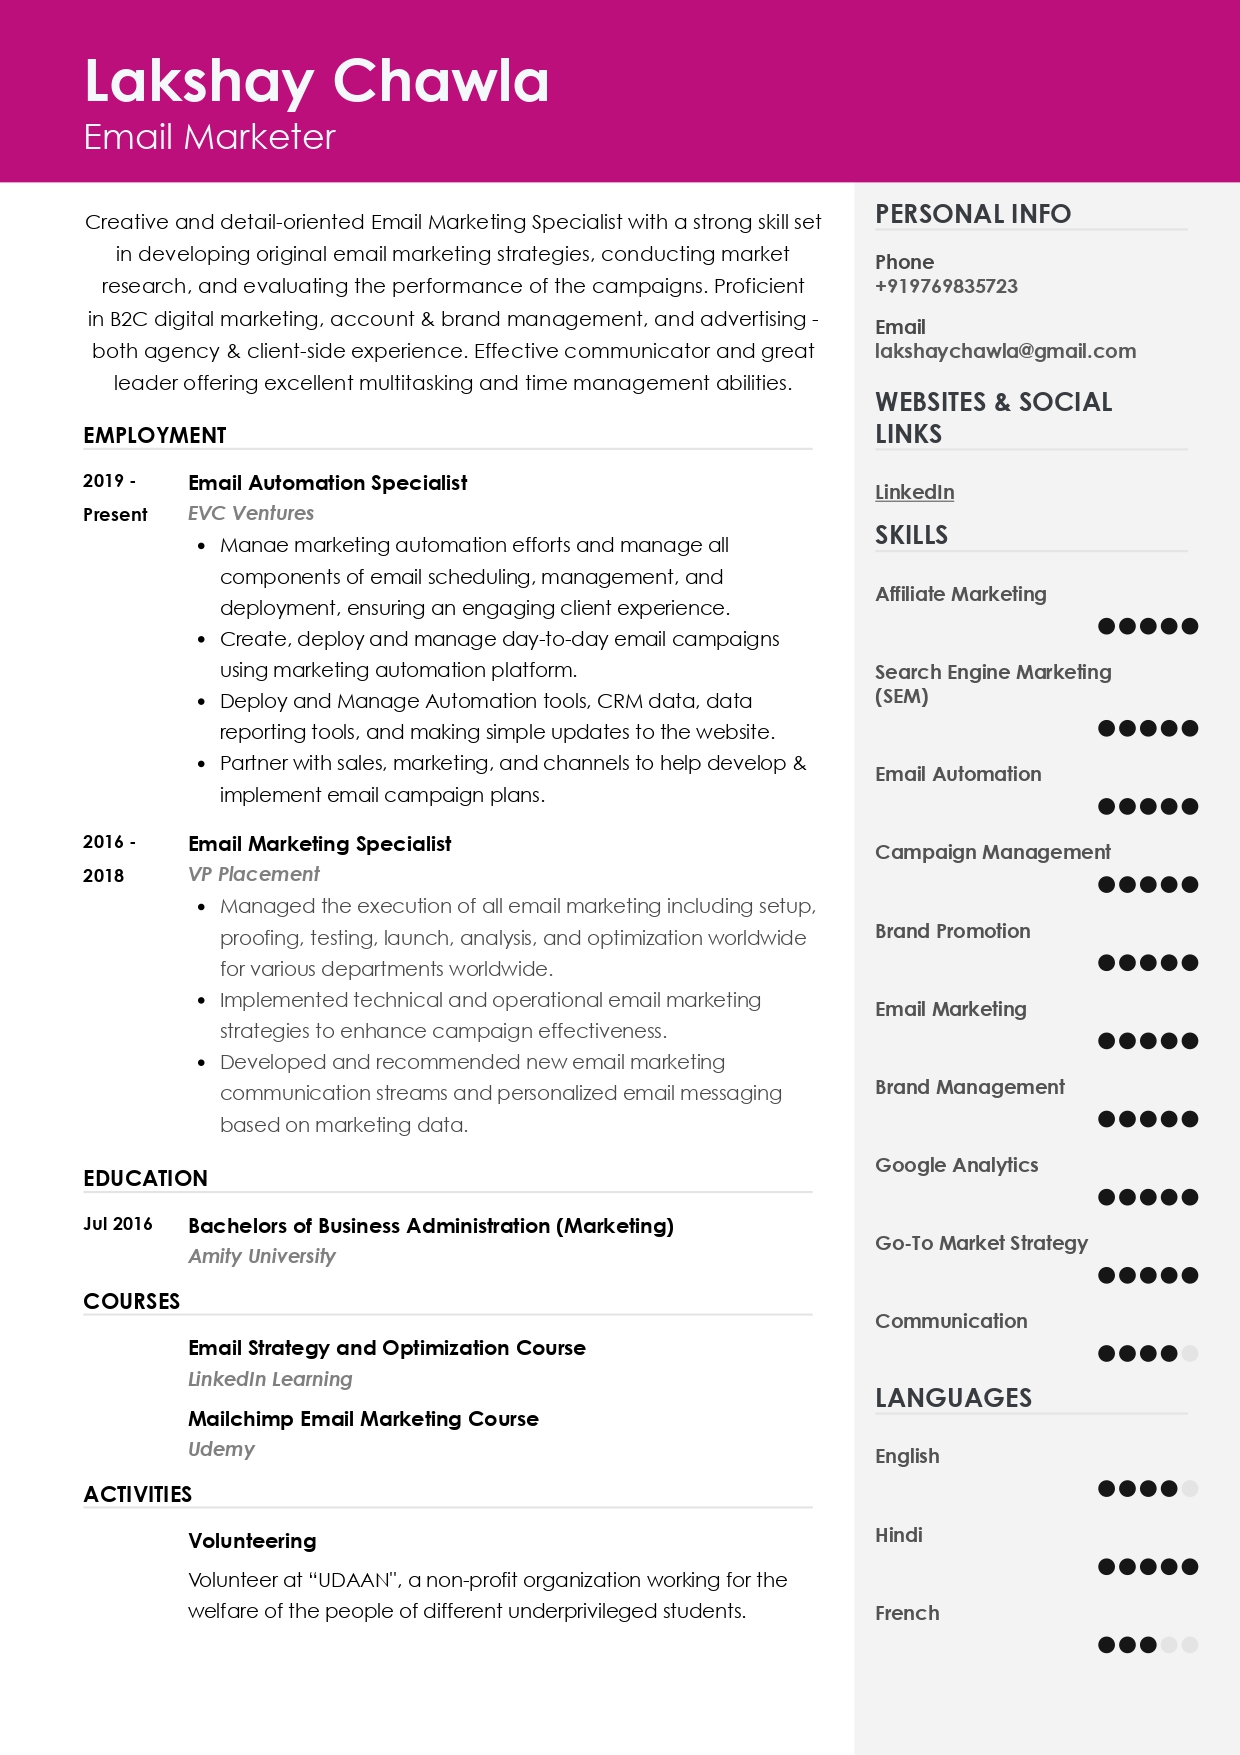 Resume of Email Marketer built on Resumod